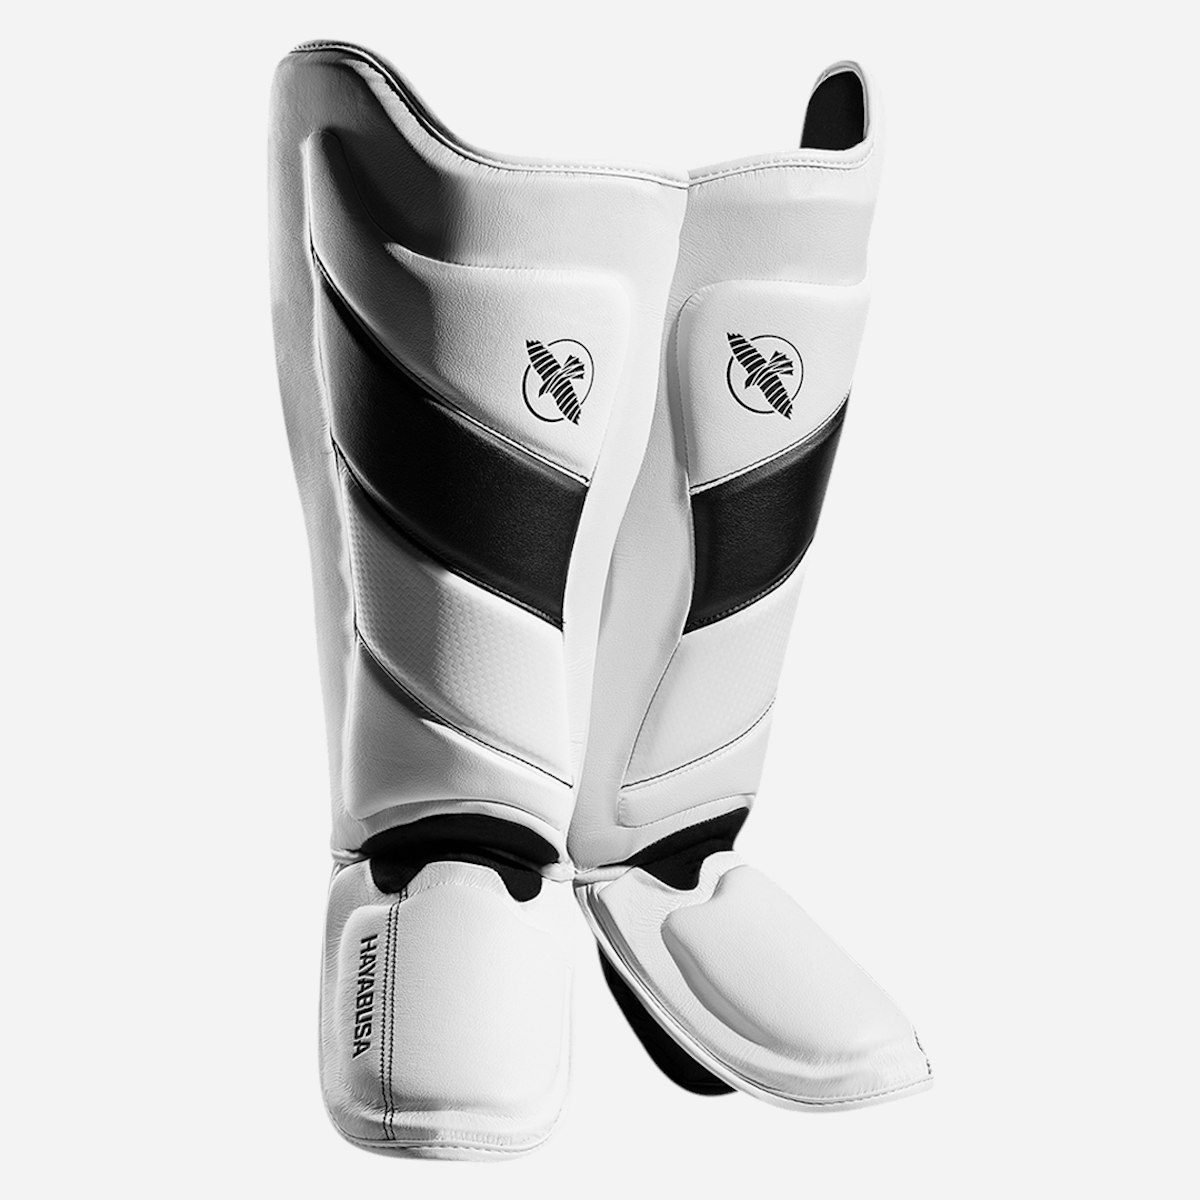 Elastic Cloth Shin & Instep Padded Guards (Pair) - White